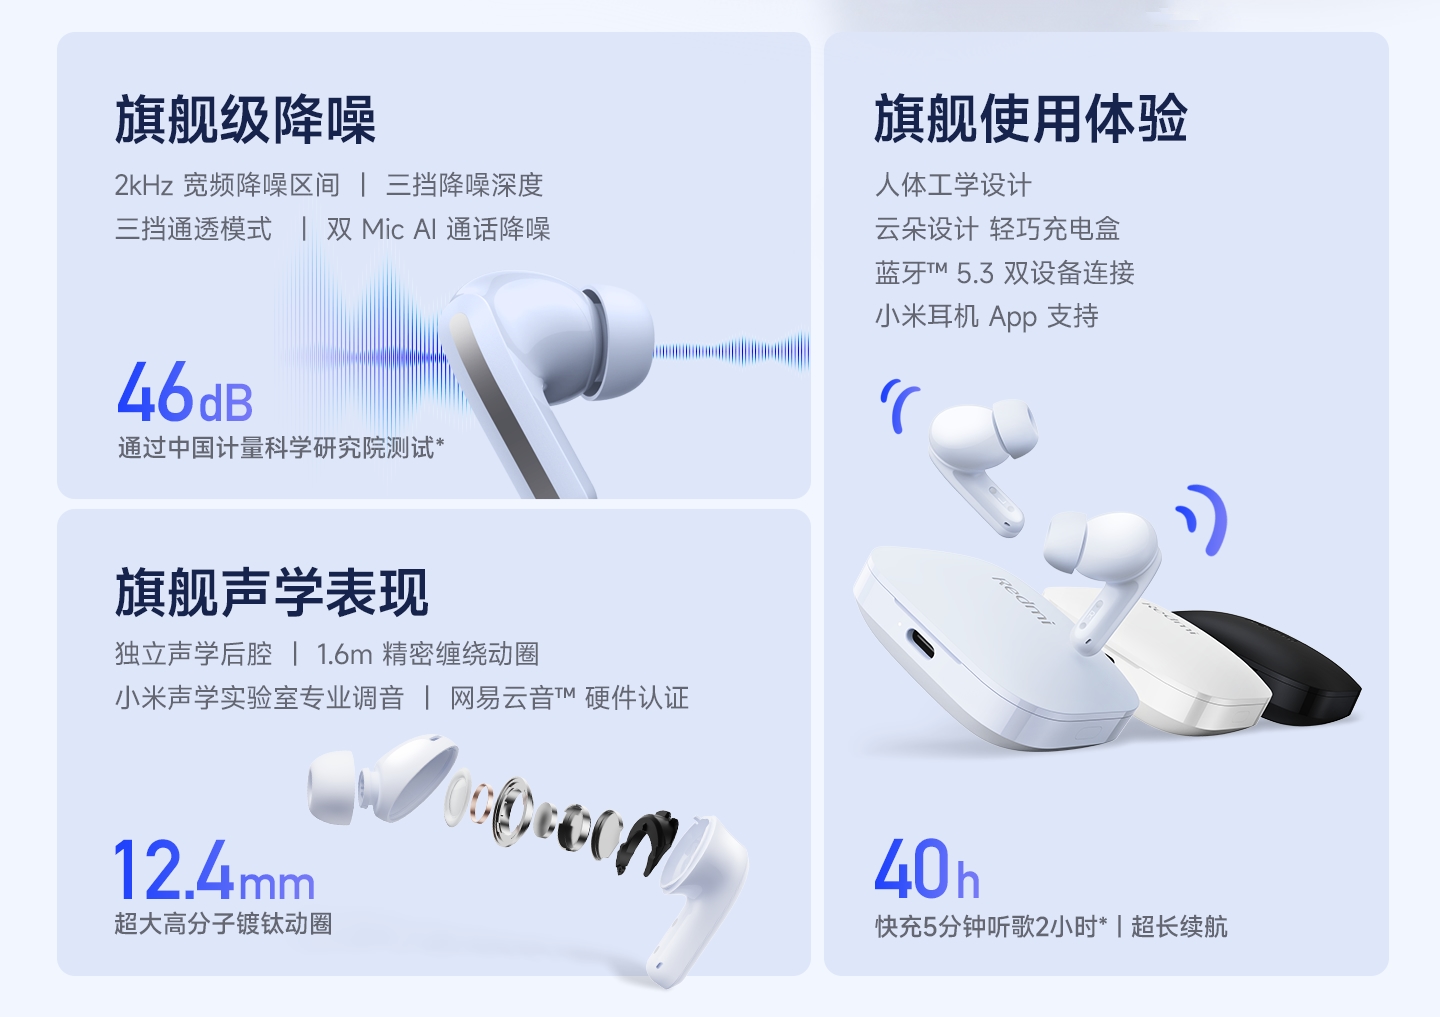 Redmi Buds 5 debut with noise cancellation and long battery life -   news